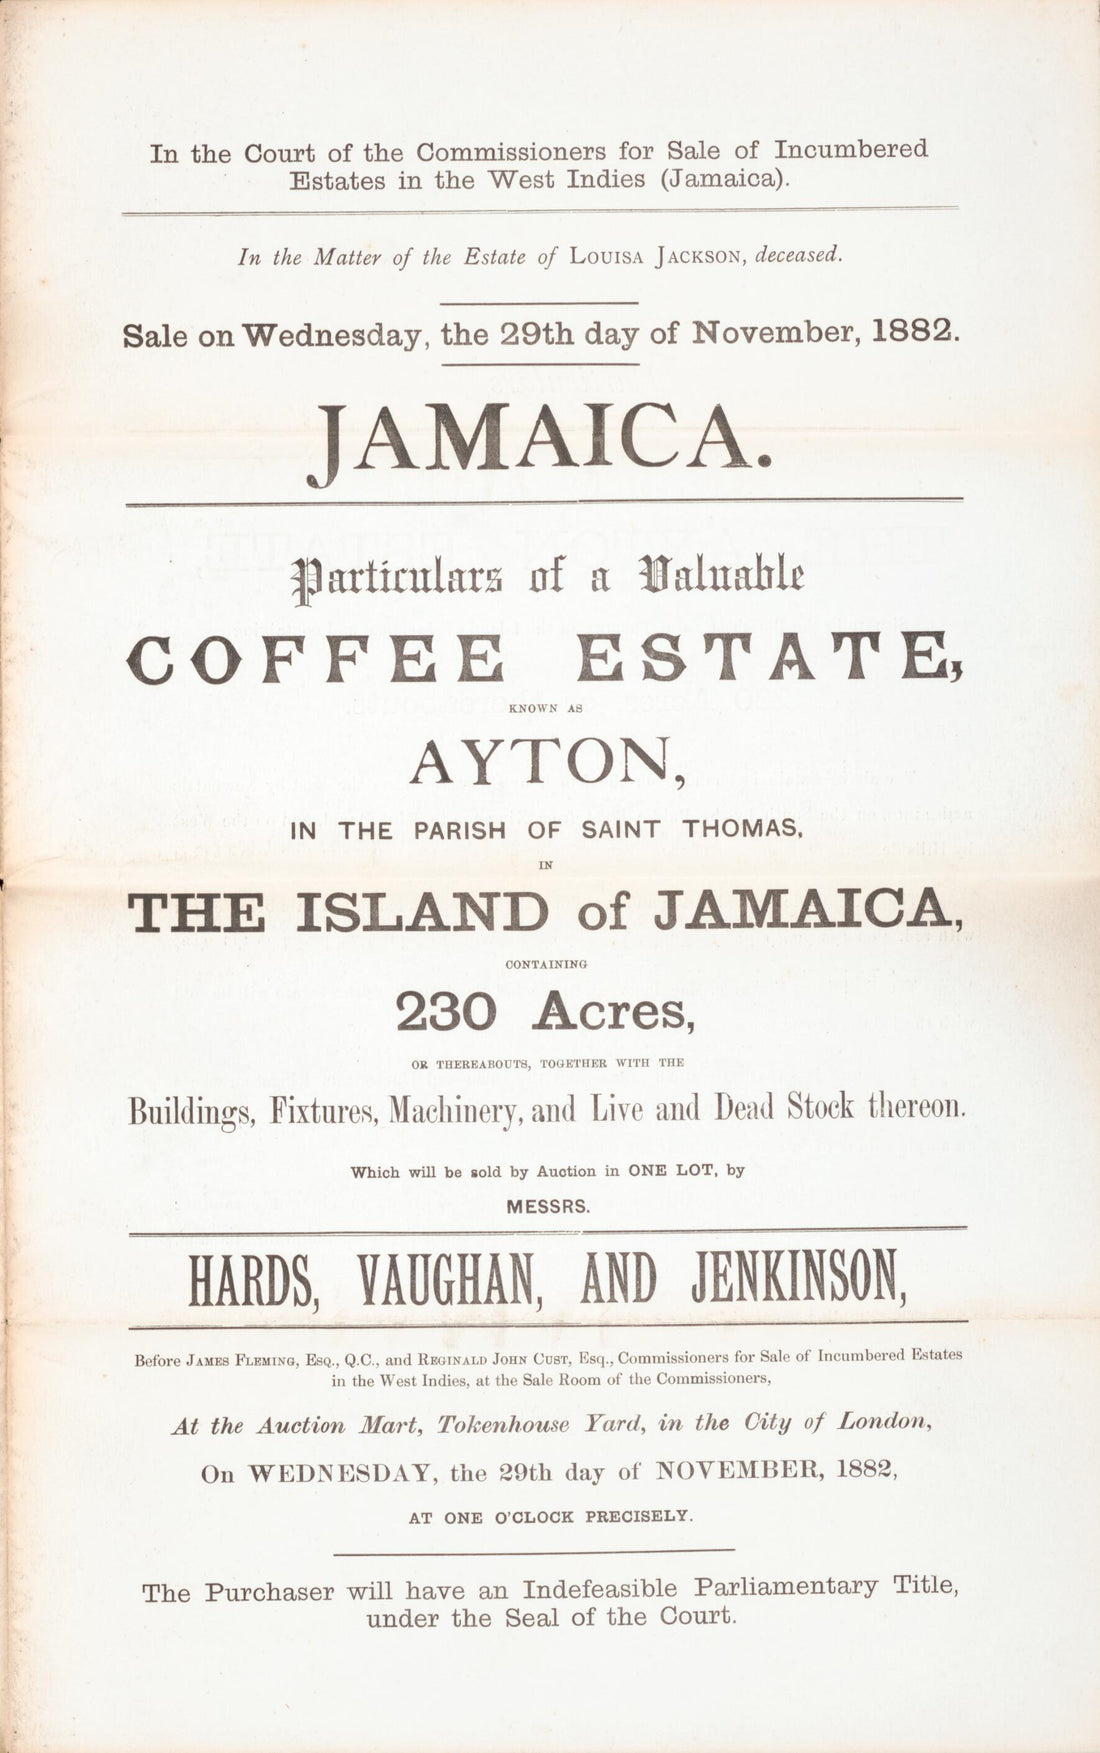 This old map of Jamaica, Particulars of a Valuable Coffee Estate : Know As the Ayton, In the Parish of Saint Thomas, In the Island of Jamaica, Containing 230 Acres, Or Thereabouts, Together With the Buildings, Fixtures, Machinery, and Live and Dead Stock